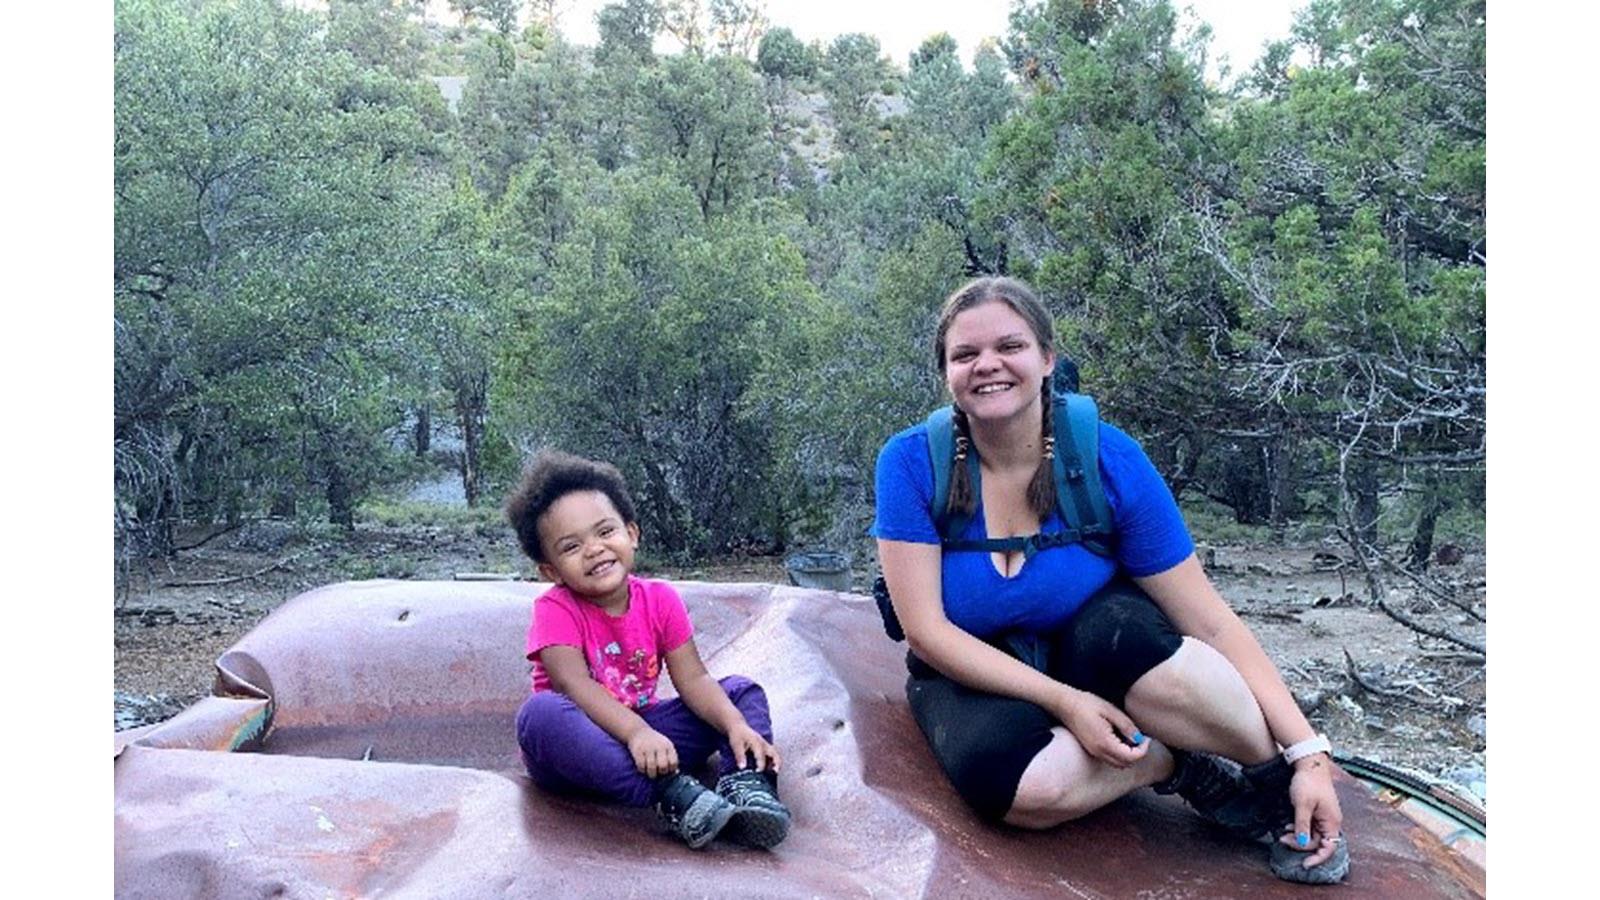 CSL Plasma Center Manager Sarah Sweat and daughter outdoors in a park in Las Vegas, Nevada